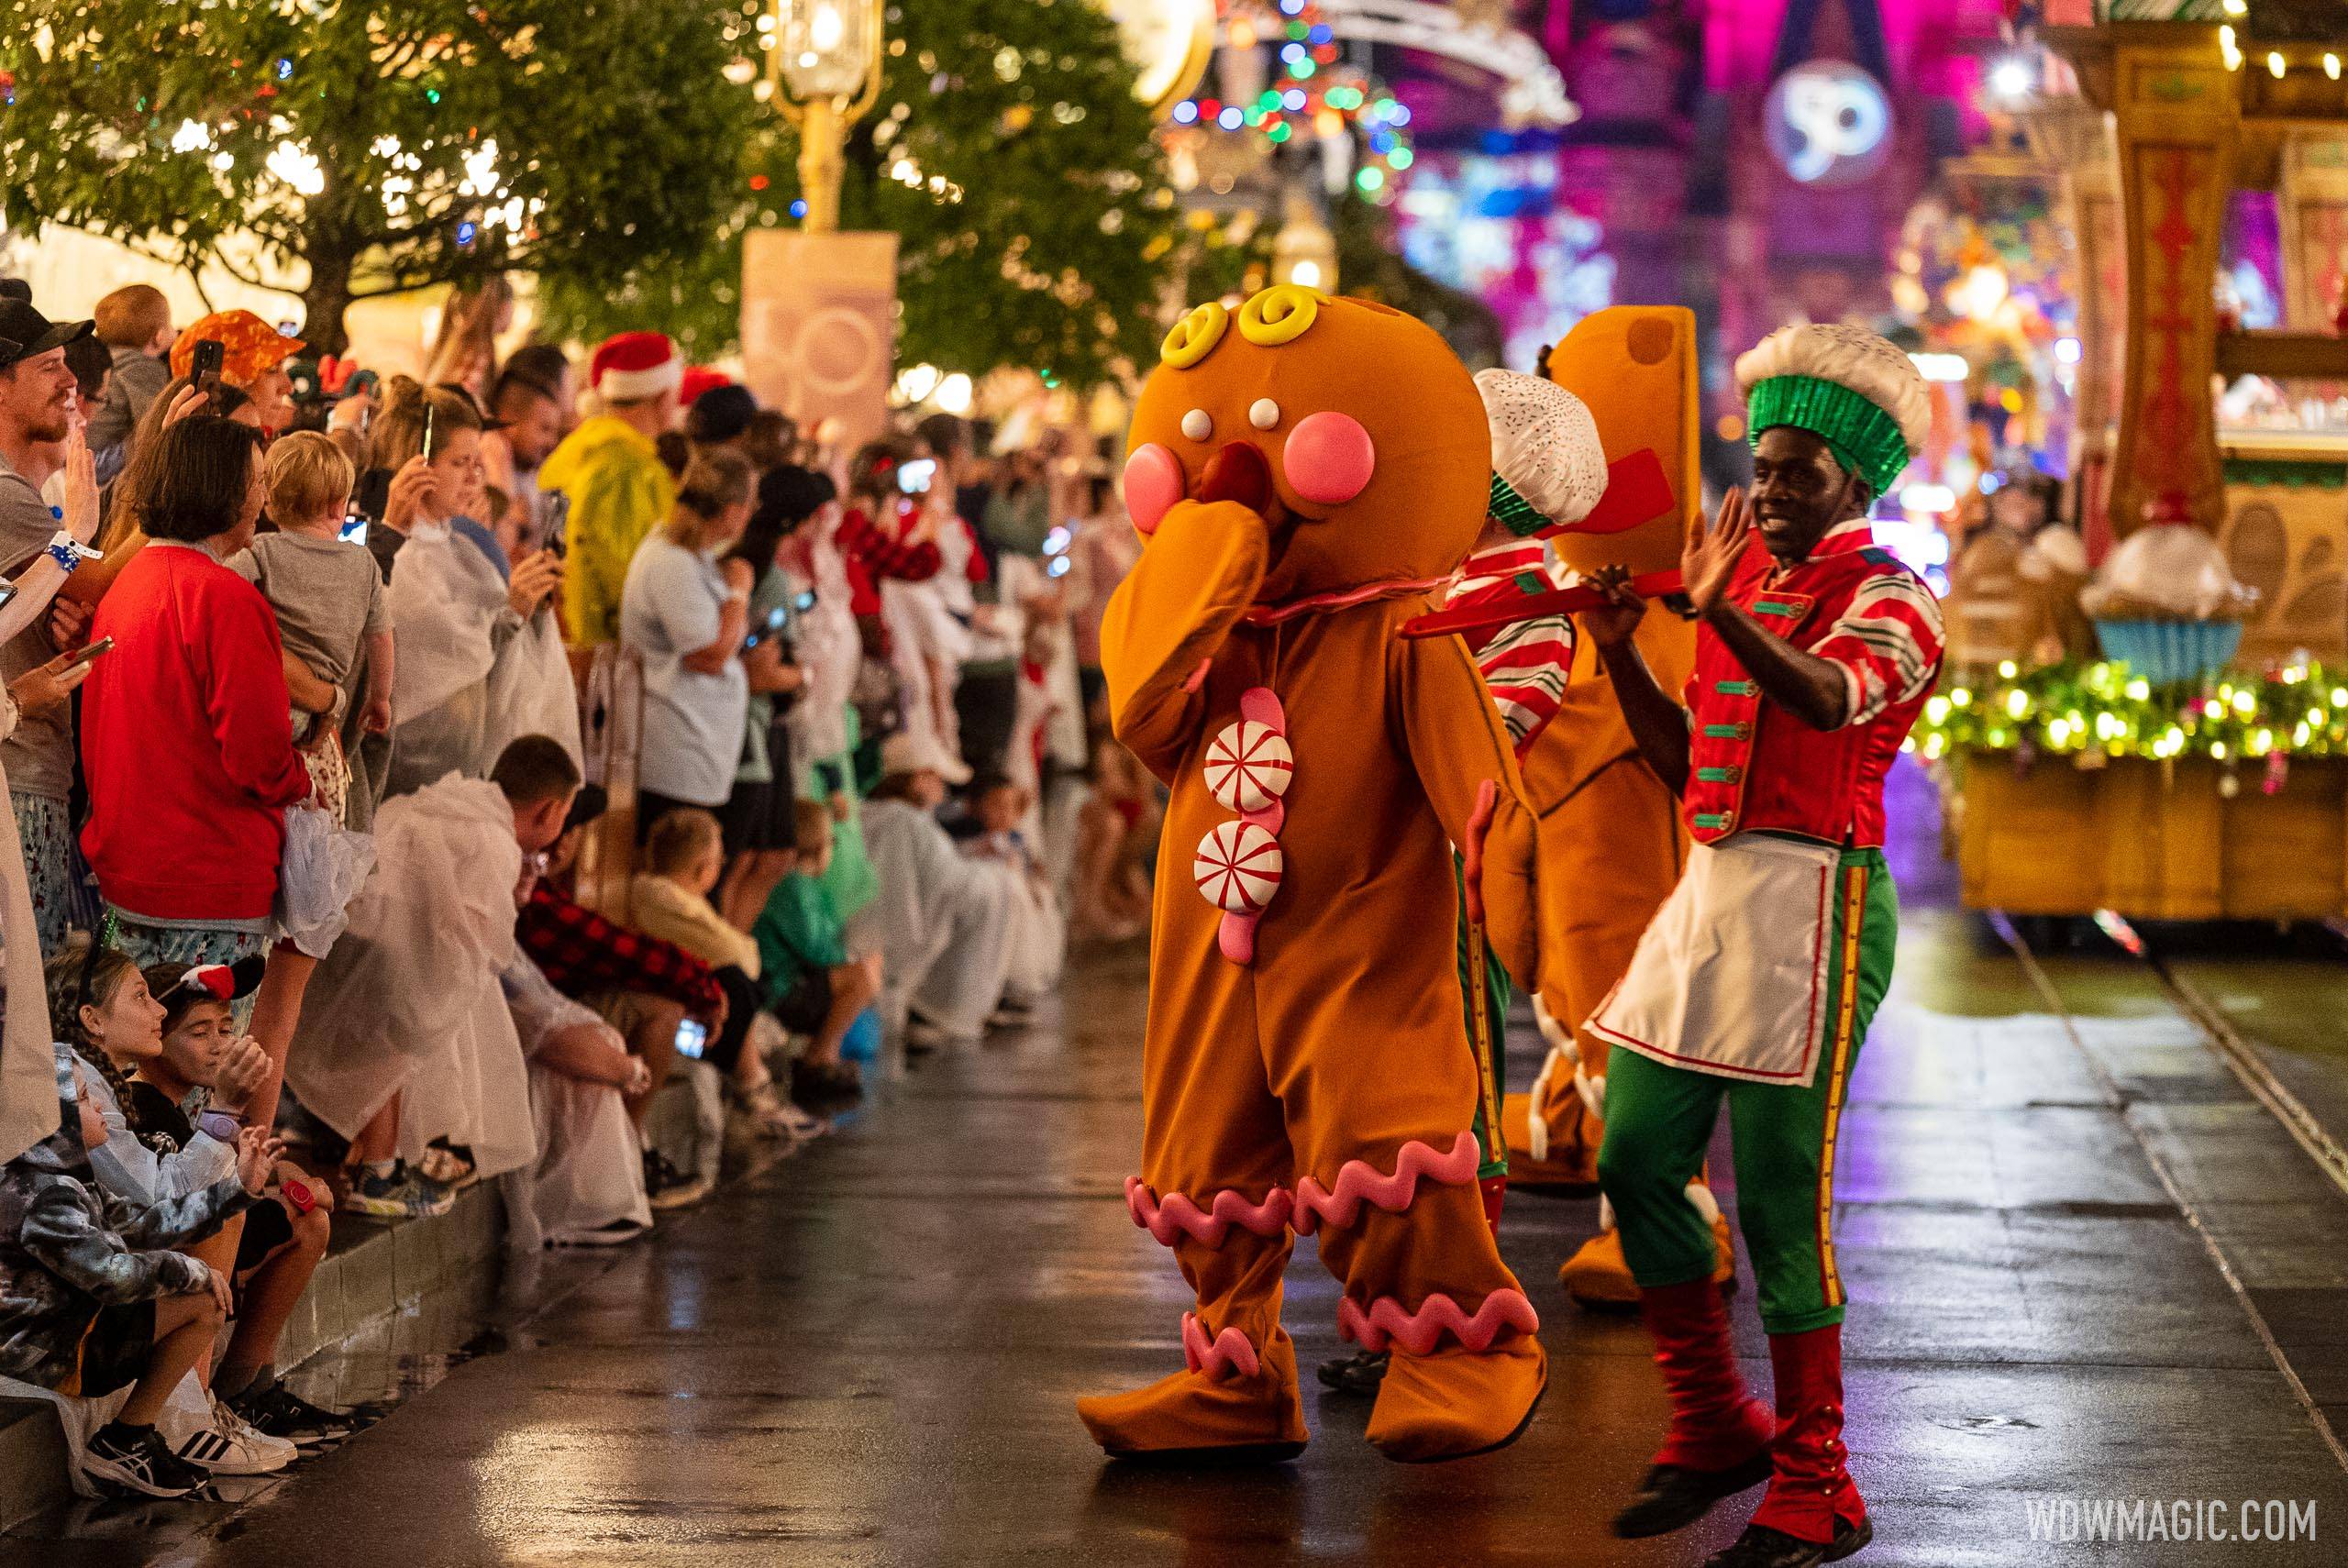 'Mickey's Once Upon a Christmastime Parade' will perform twice each day during the peak Christmas week at Walt Disney World